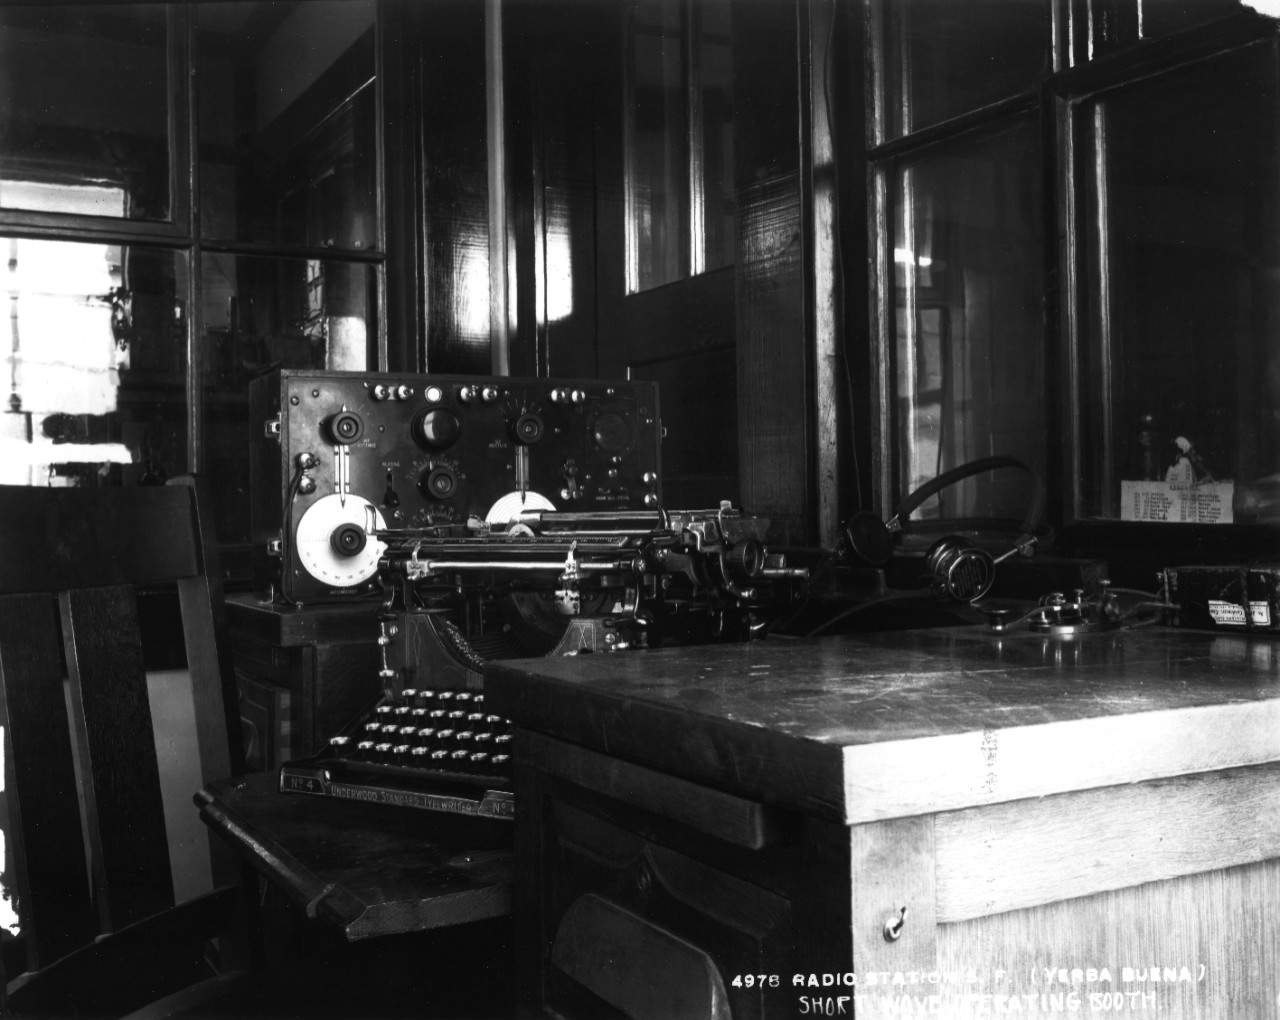 32 photographs (many with copy negatives) of U.S. Naval Radio Station Yerba Buena, San Francisco, California, 1917-1920. Views of interior buildings, towers, and antennae. Interior views of equipment including radio compass, telephone transmitters, receivers, power house, short wave sets, exchange, telegraphone wires, amplifiers, control circuits, transcribing amplifier, rheostats, kleinschmidt installation and perforator.  Some of these are copies made from nitrate negatives that were disposed of.